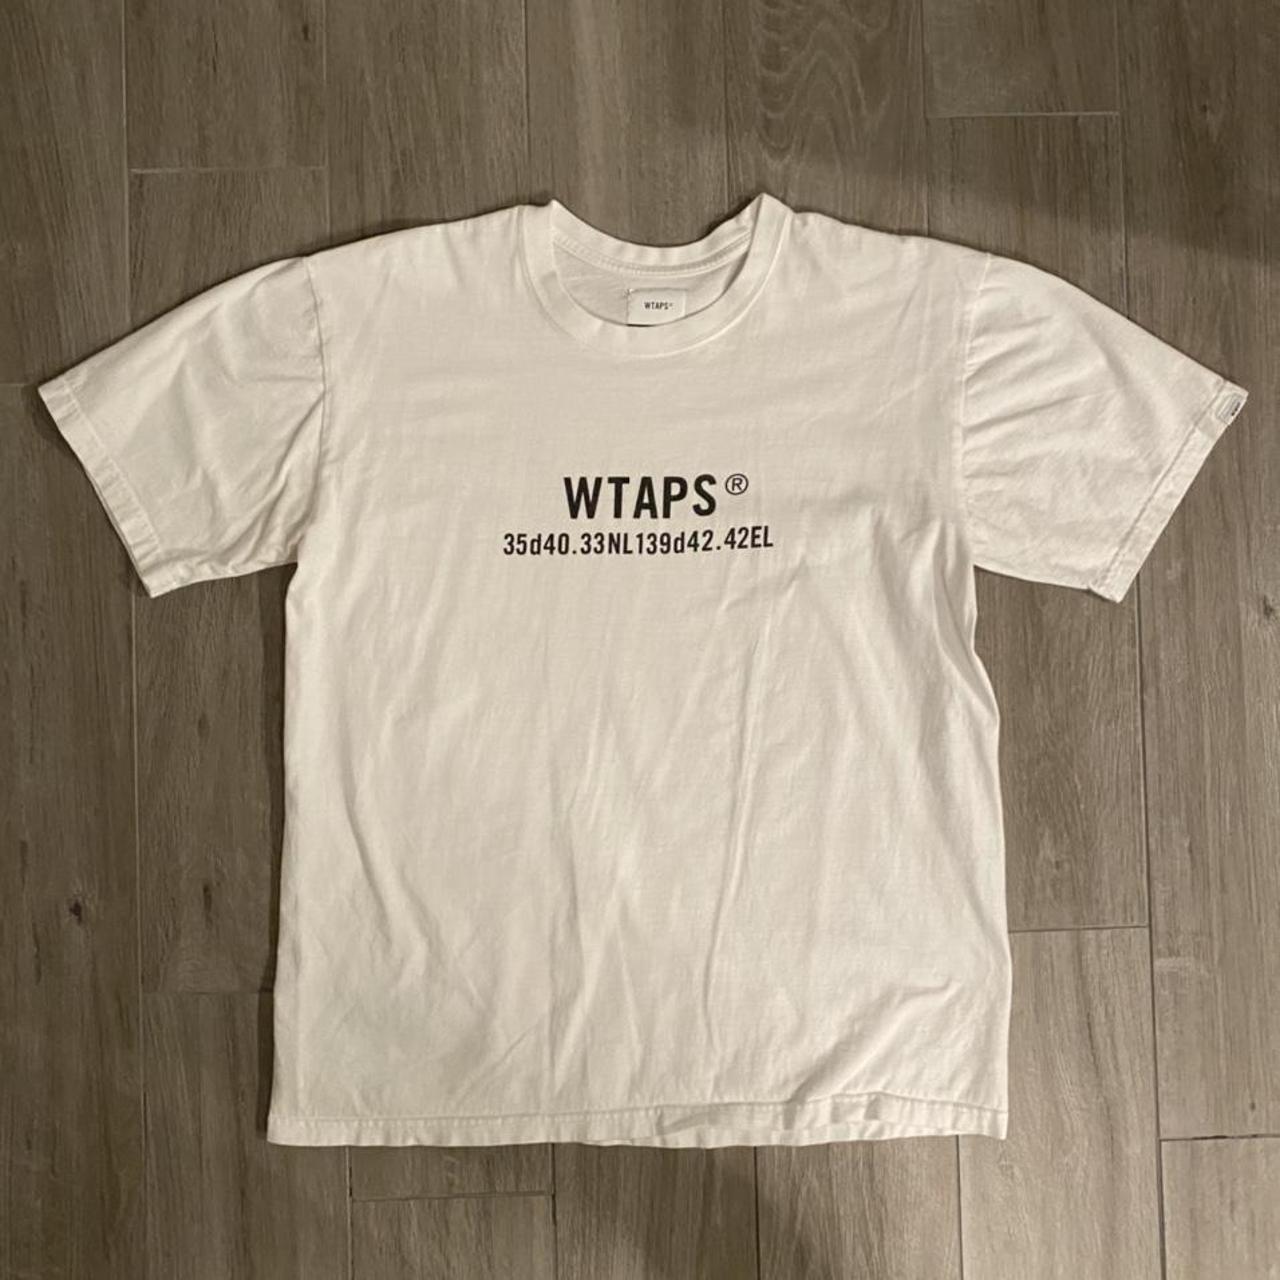 Wtaps white tee with black industrial text size x 03